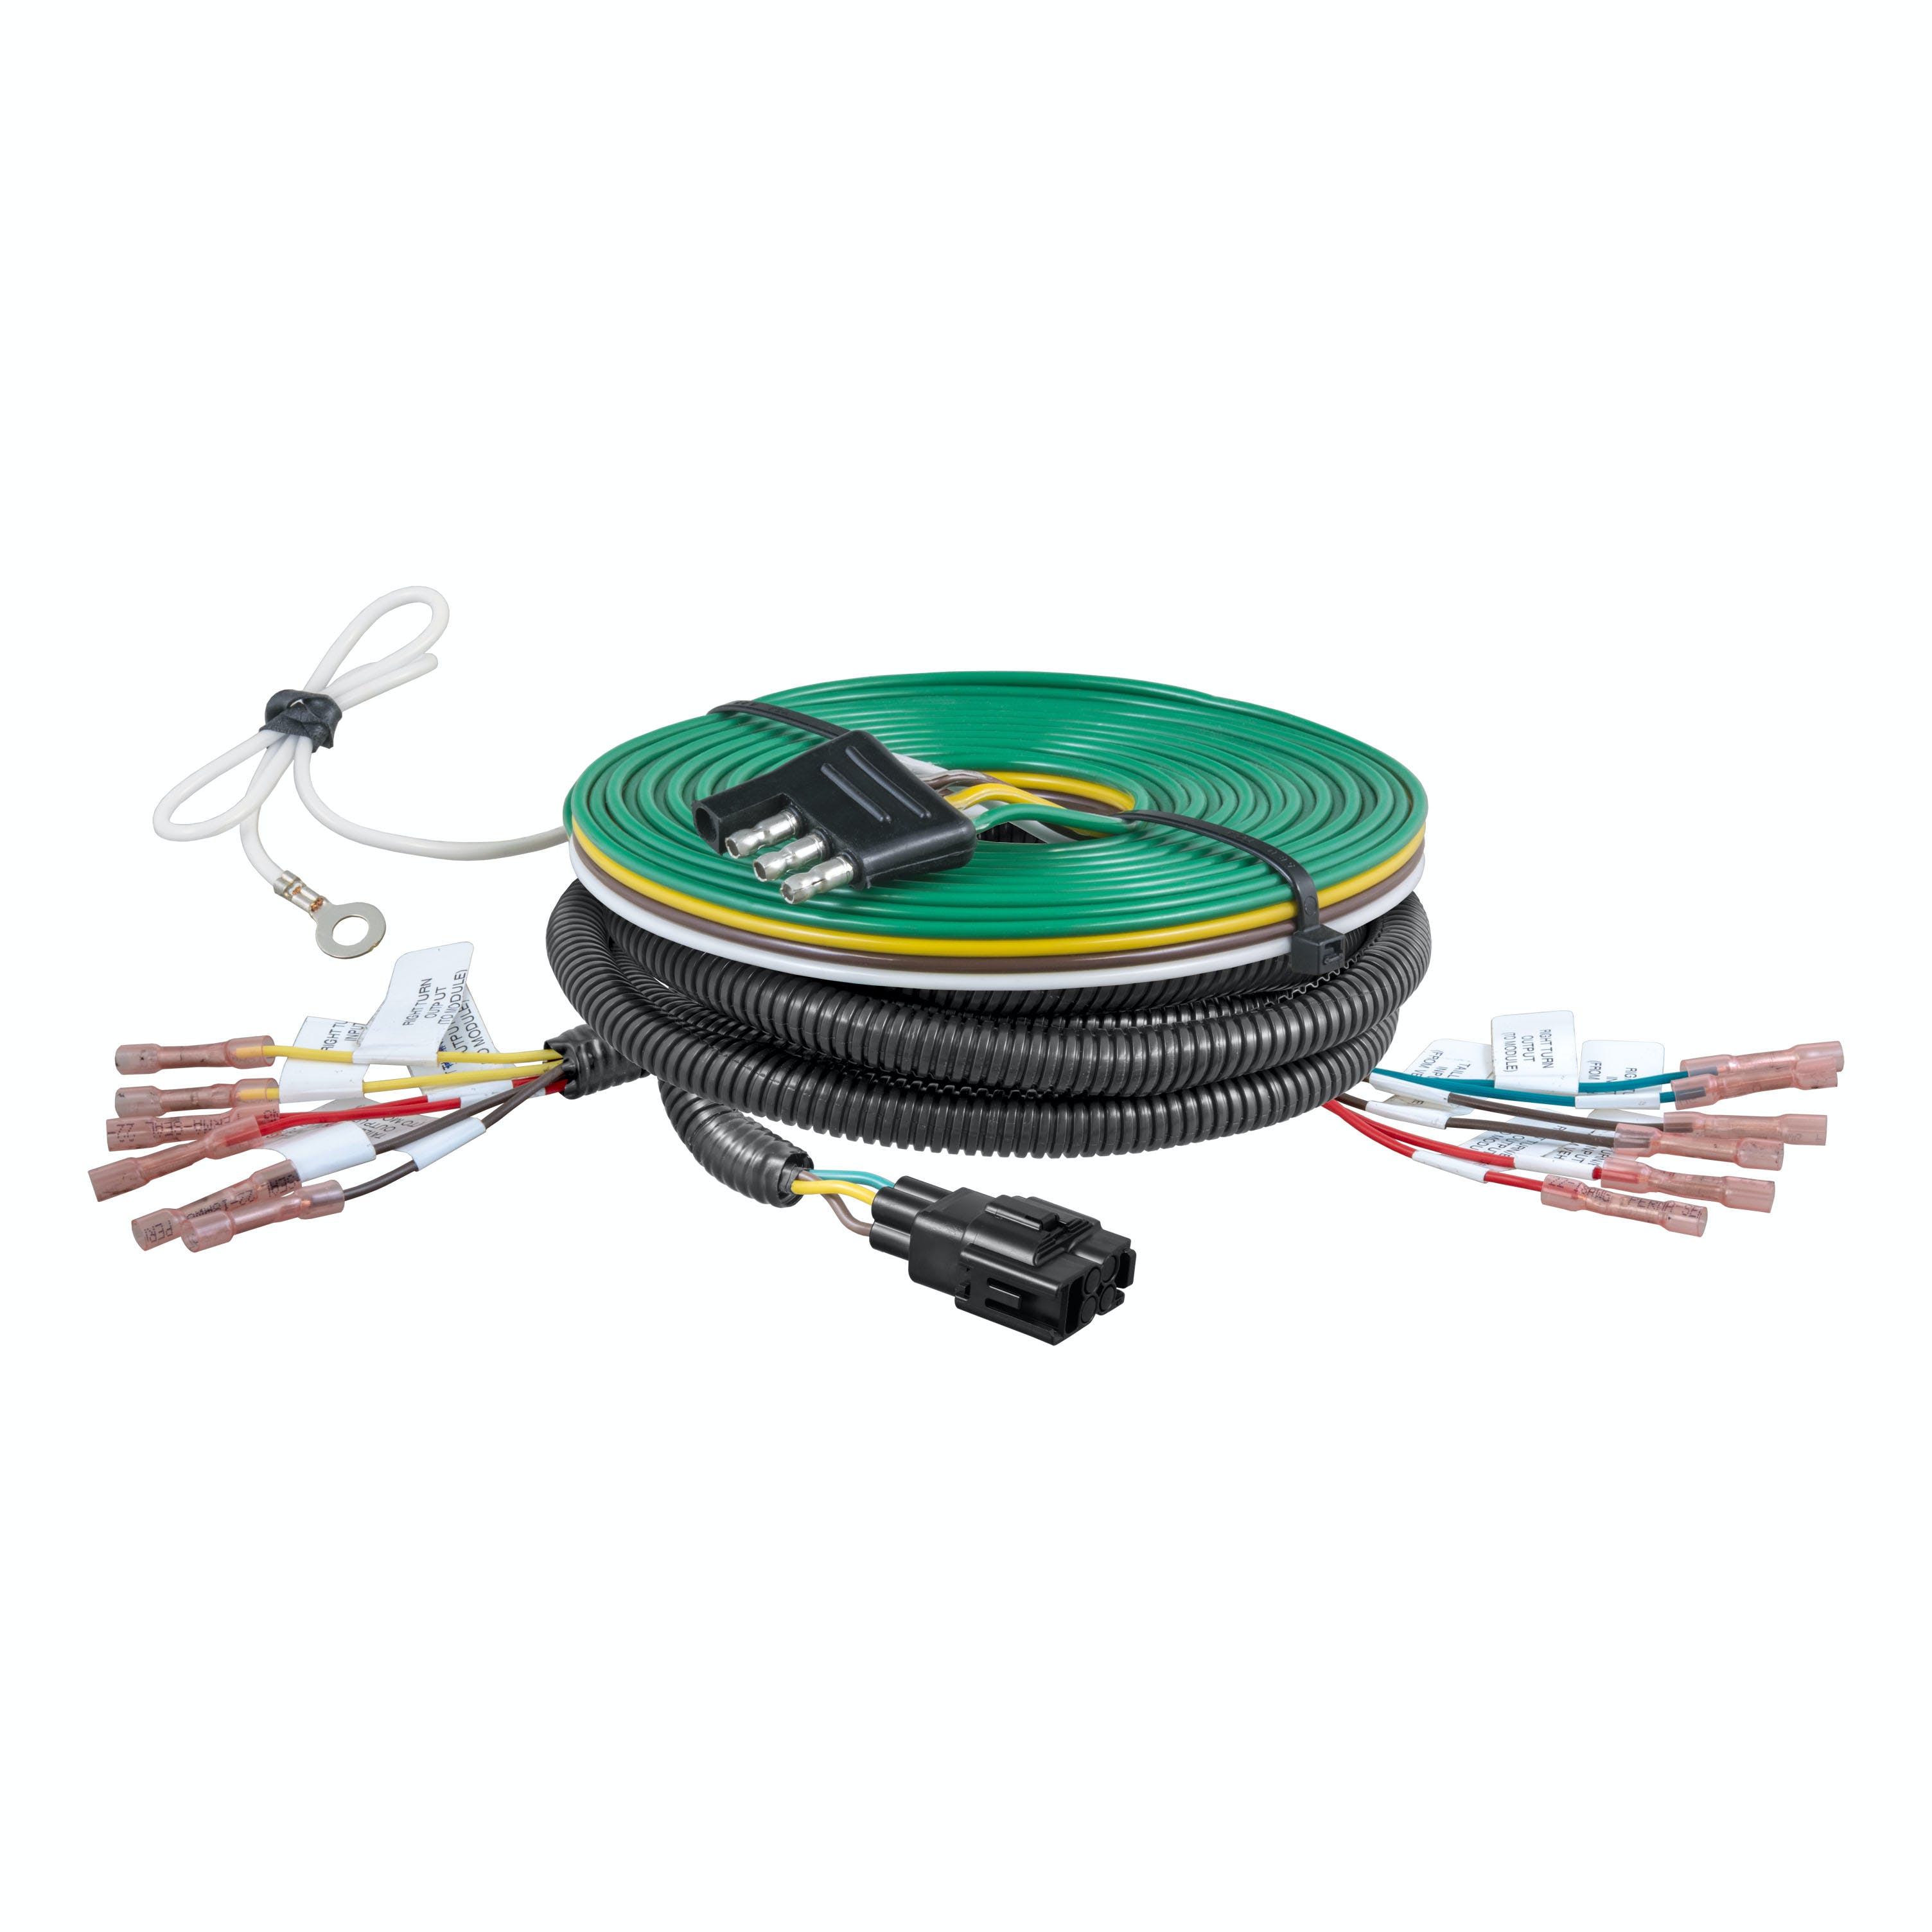 CURT 58979 Universal Splice-In Towed-Vehicle RV Wiring Harness for Dinghy Towing